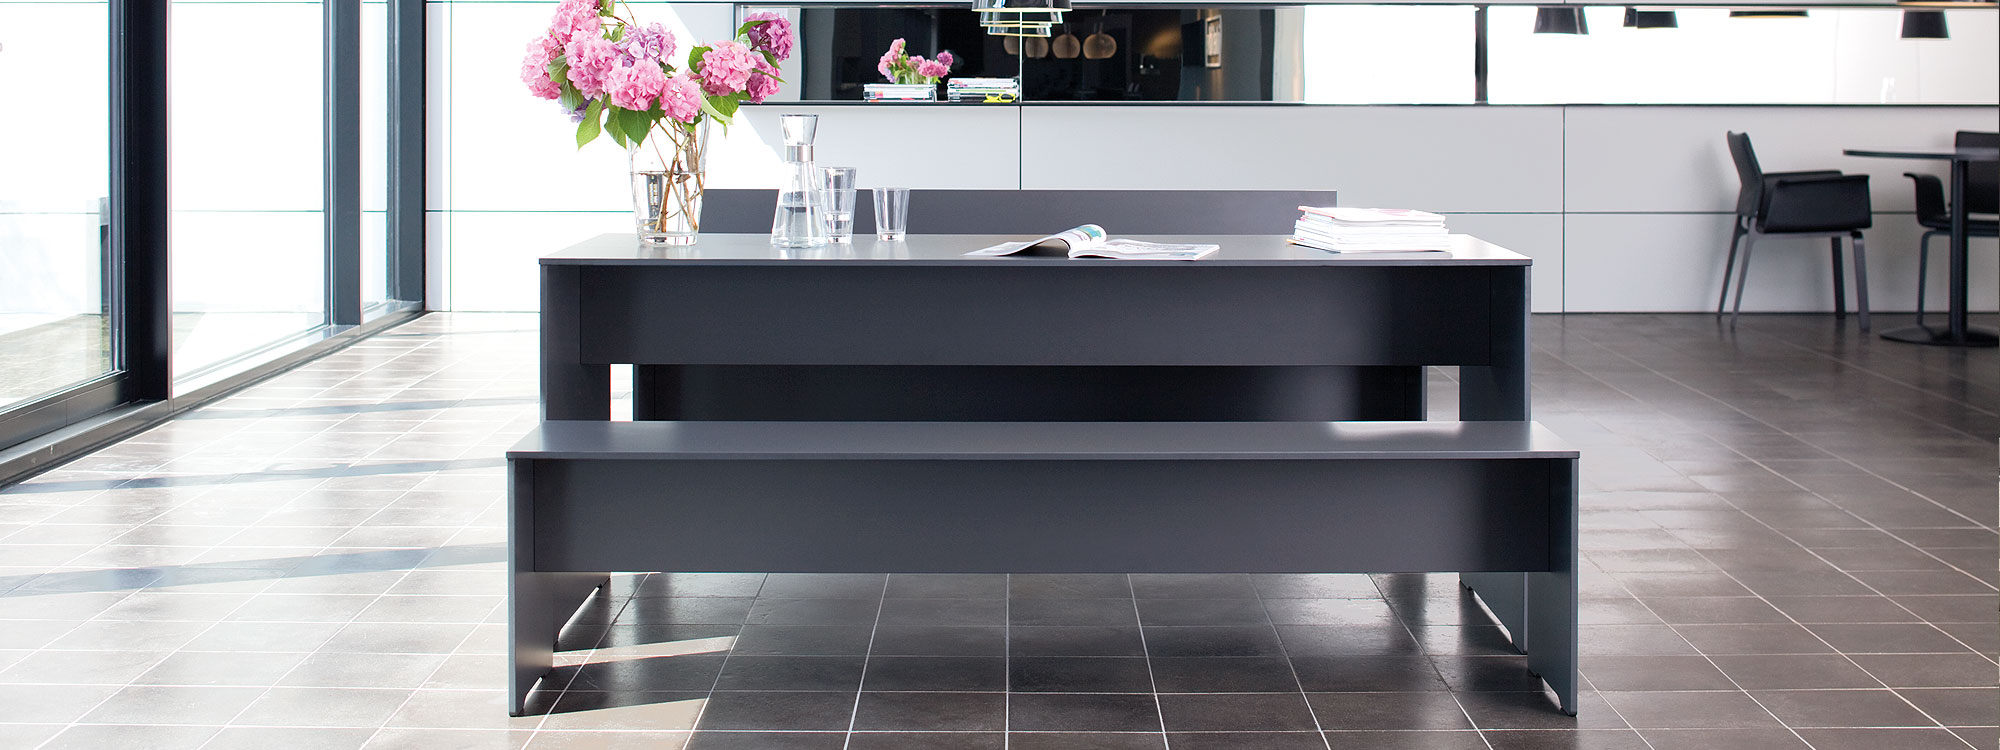 Interior Shot Of Anthracite RIVA Modern Table And Benches Designed By Marie Smid-Schweiger. MINIMALIST Garden DINING Furniture Is Ideal Modern Picnic Furniture As Well As Restaurant Tables And Benches. By Conmoto GERMAN Designer Garden FURNITURE.